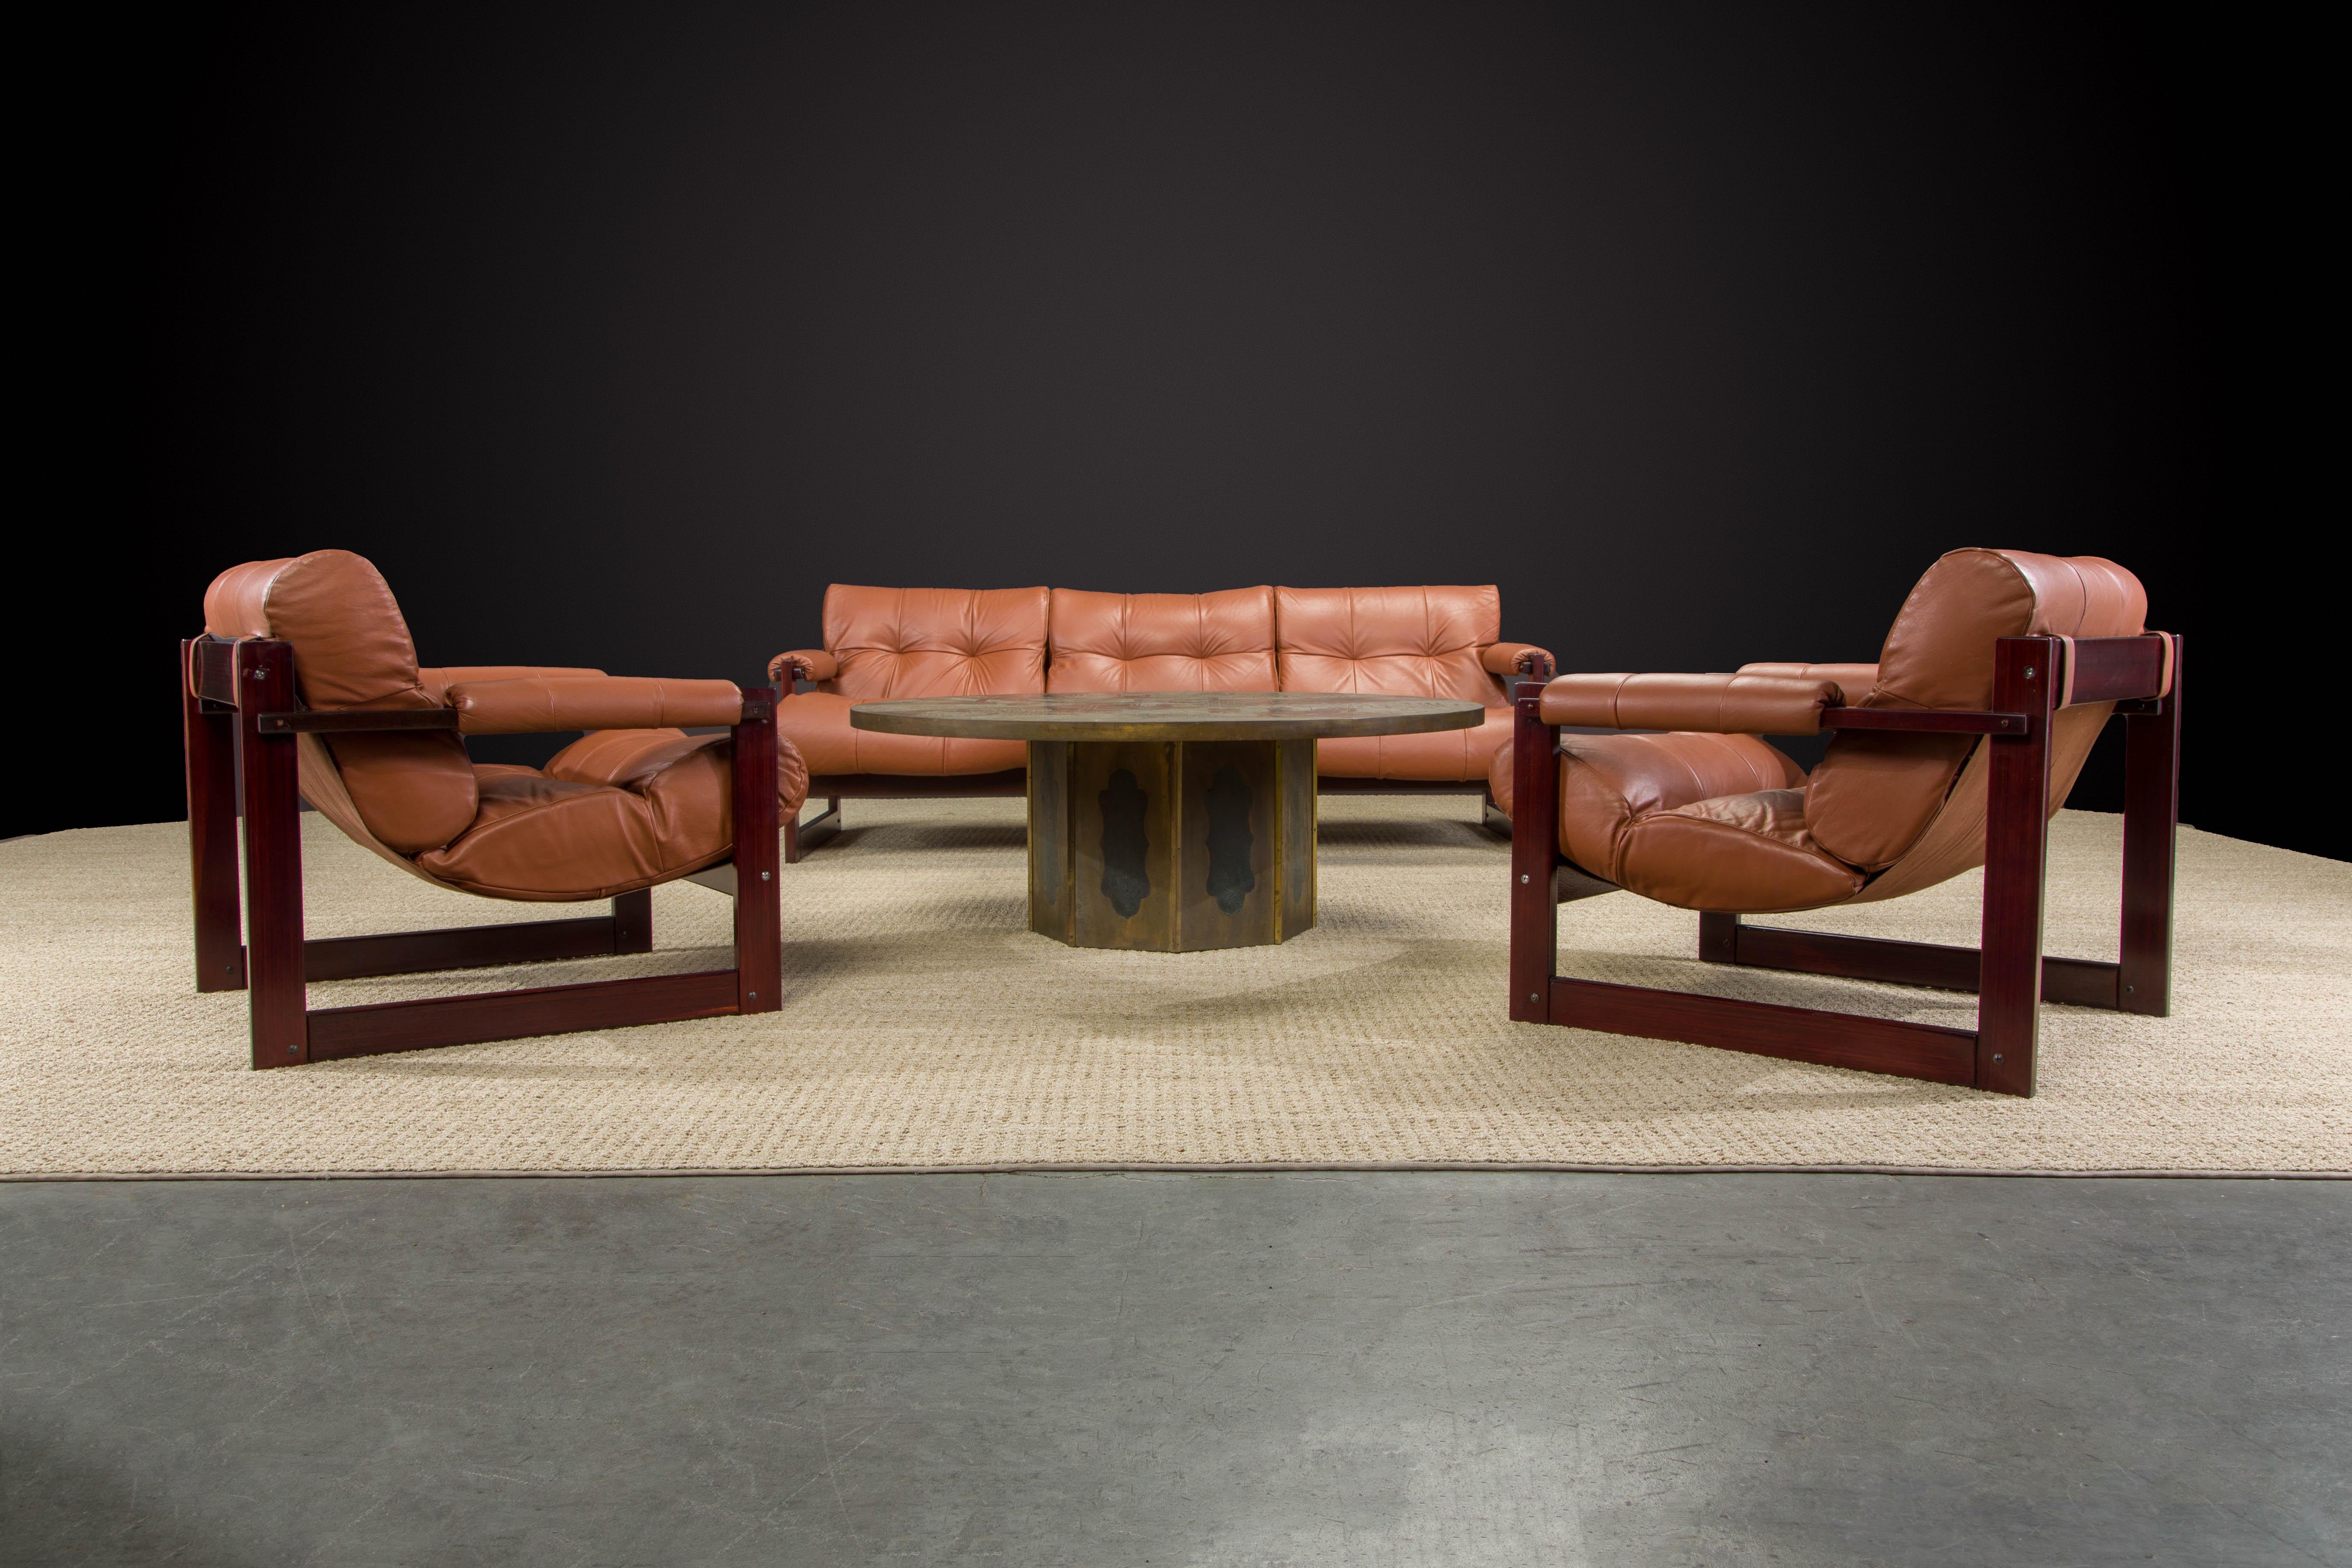 Brazilian Percival Lafer 'S-1' Rosewood and Leather Living Room Set, Brazil, 1976, Signed